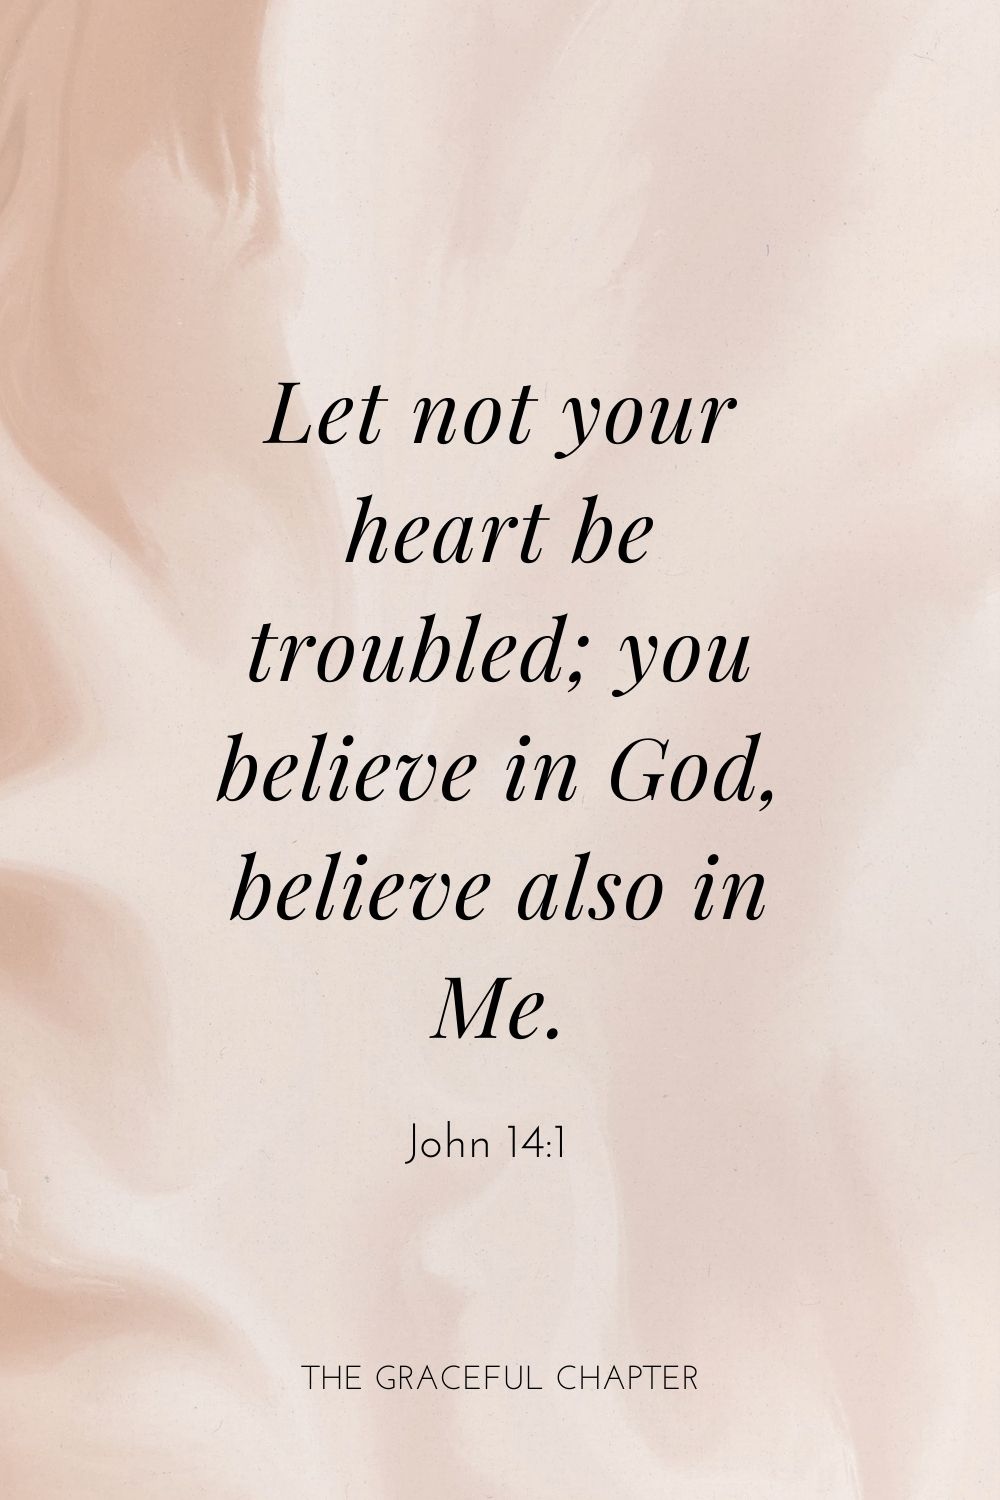 Let not your heart be troubled; you believe in God, believe also in Me. John 14:1